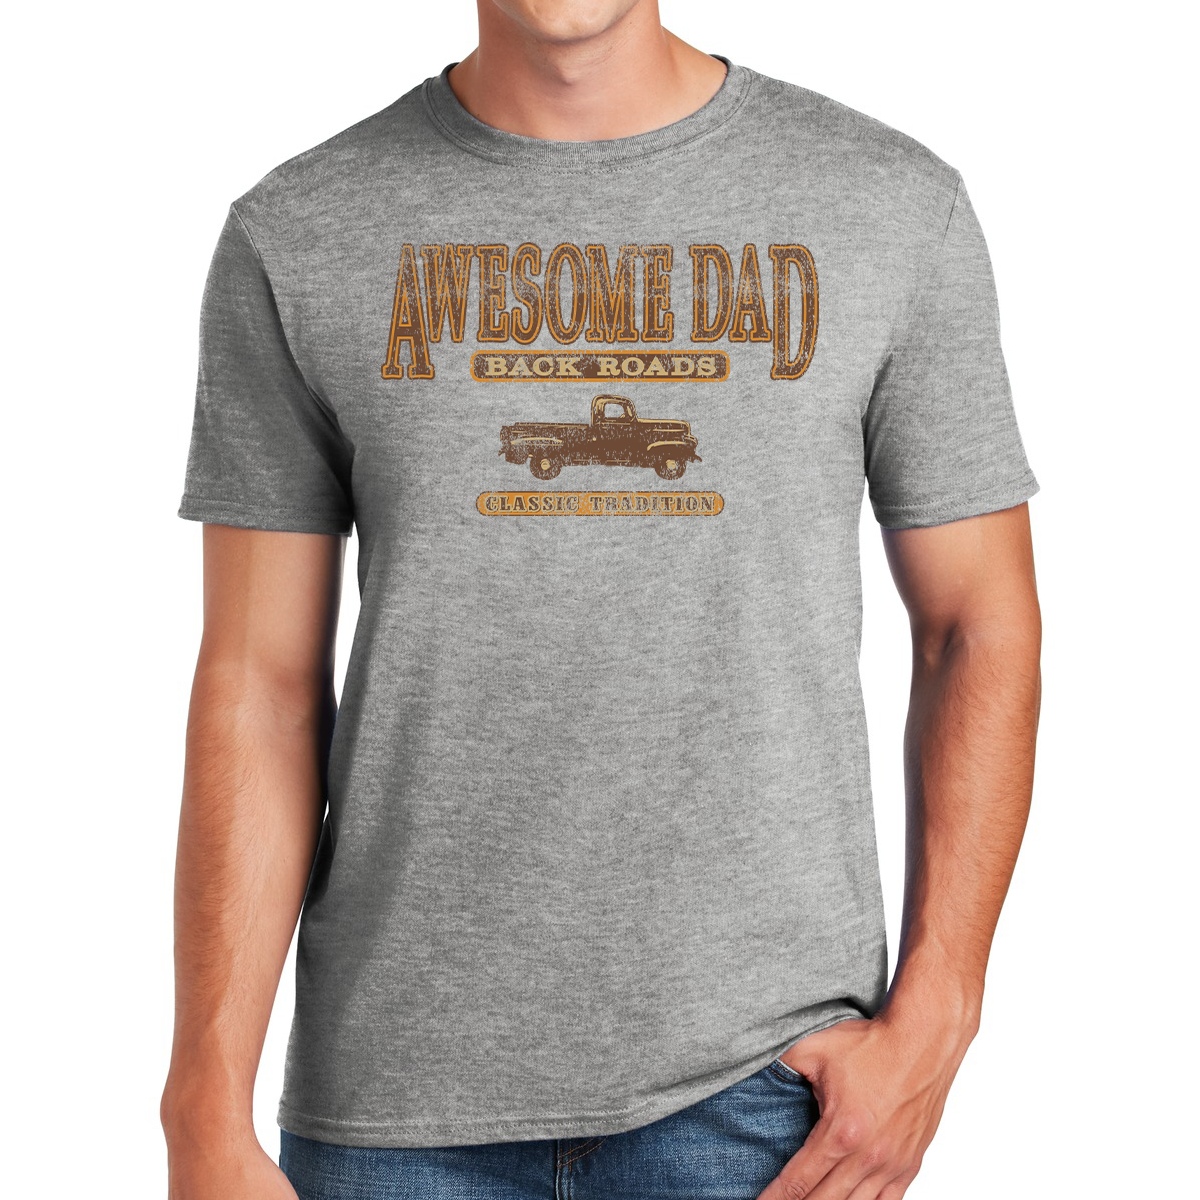 Awesome Dad Back Roads Classic Tradition Old Timer Restaurant Gifts for Dads T-shirt